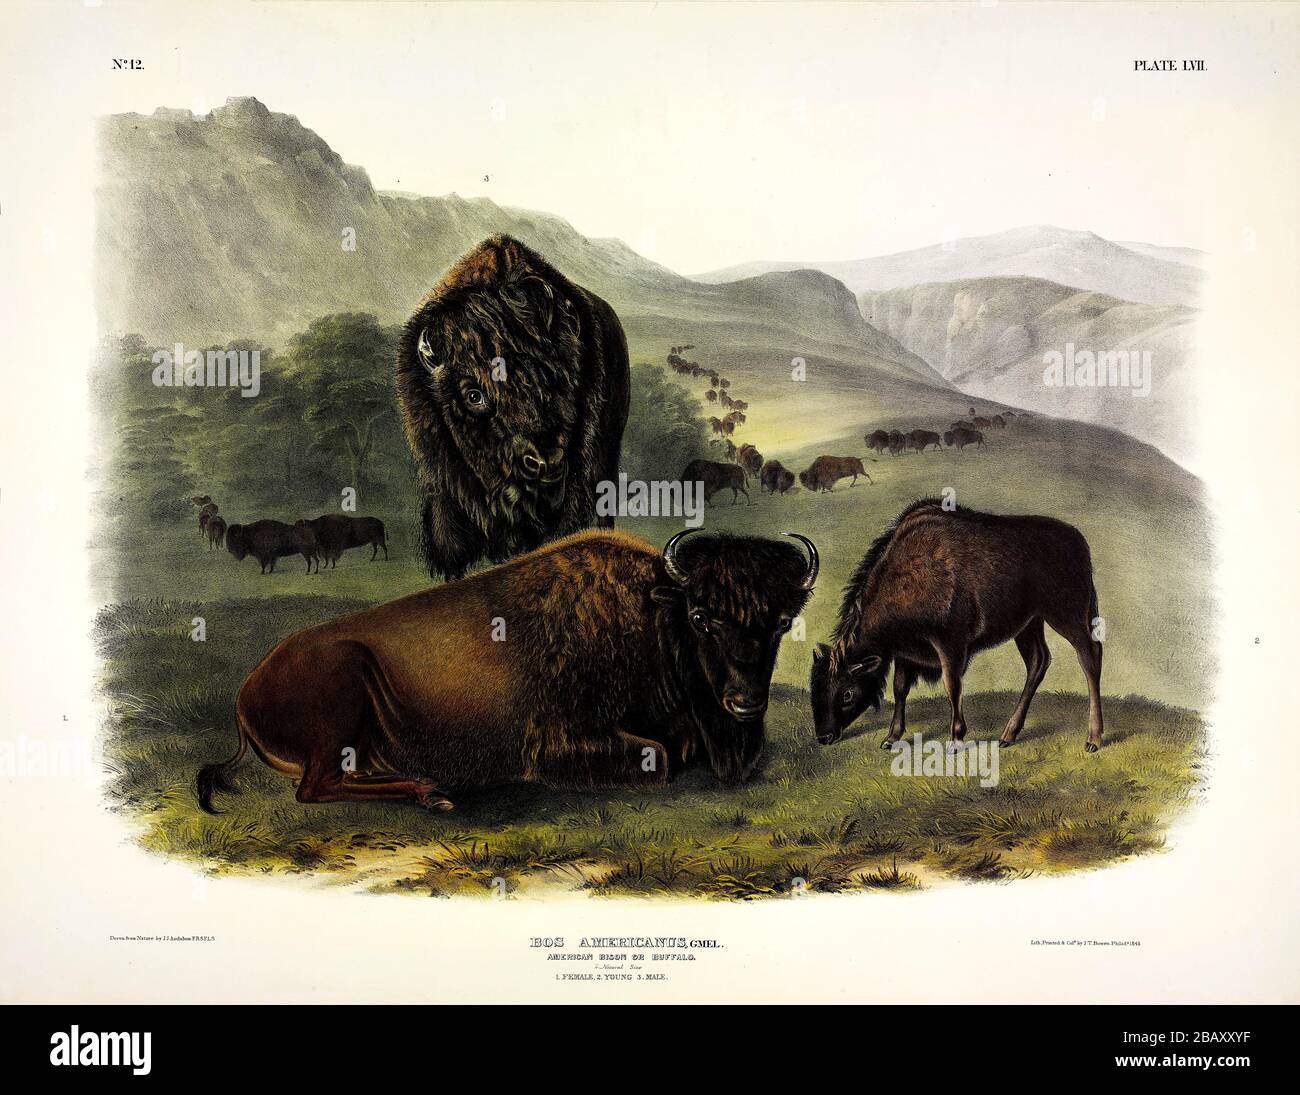 Plate 57 American Bison, female and young, from The Viviparous Quadrupeds of North America, John James Audubon, Very high resolution and quality image Stock Photo